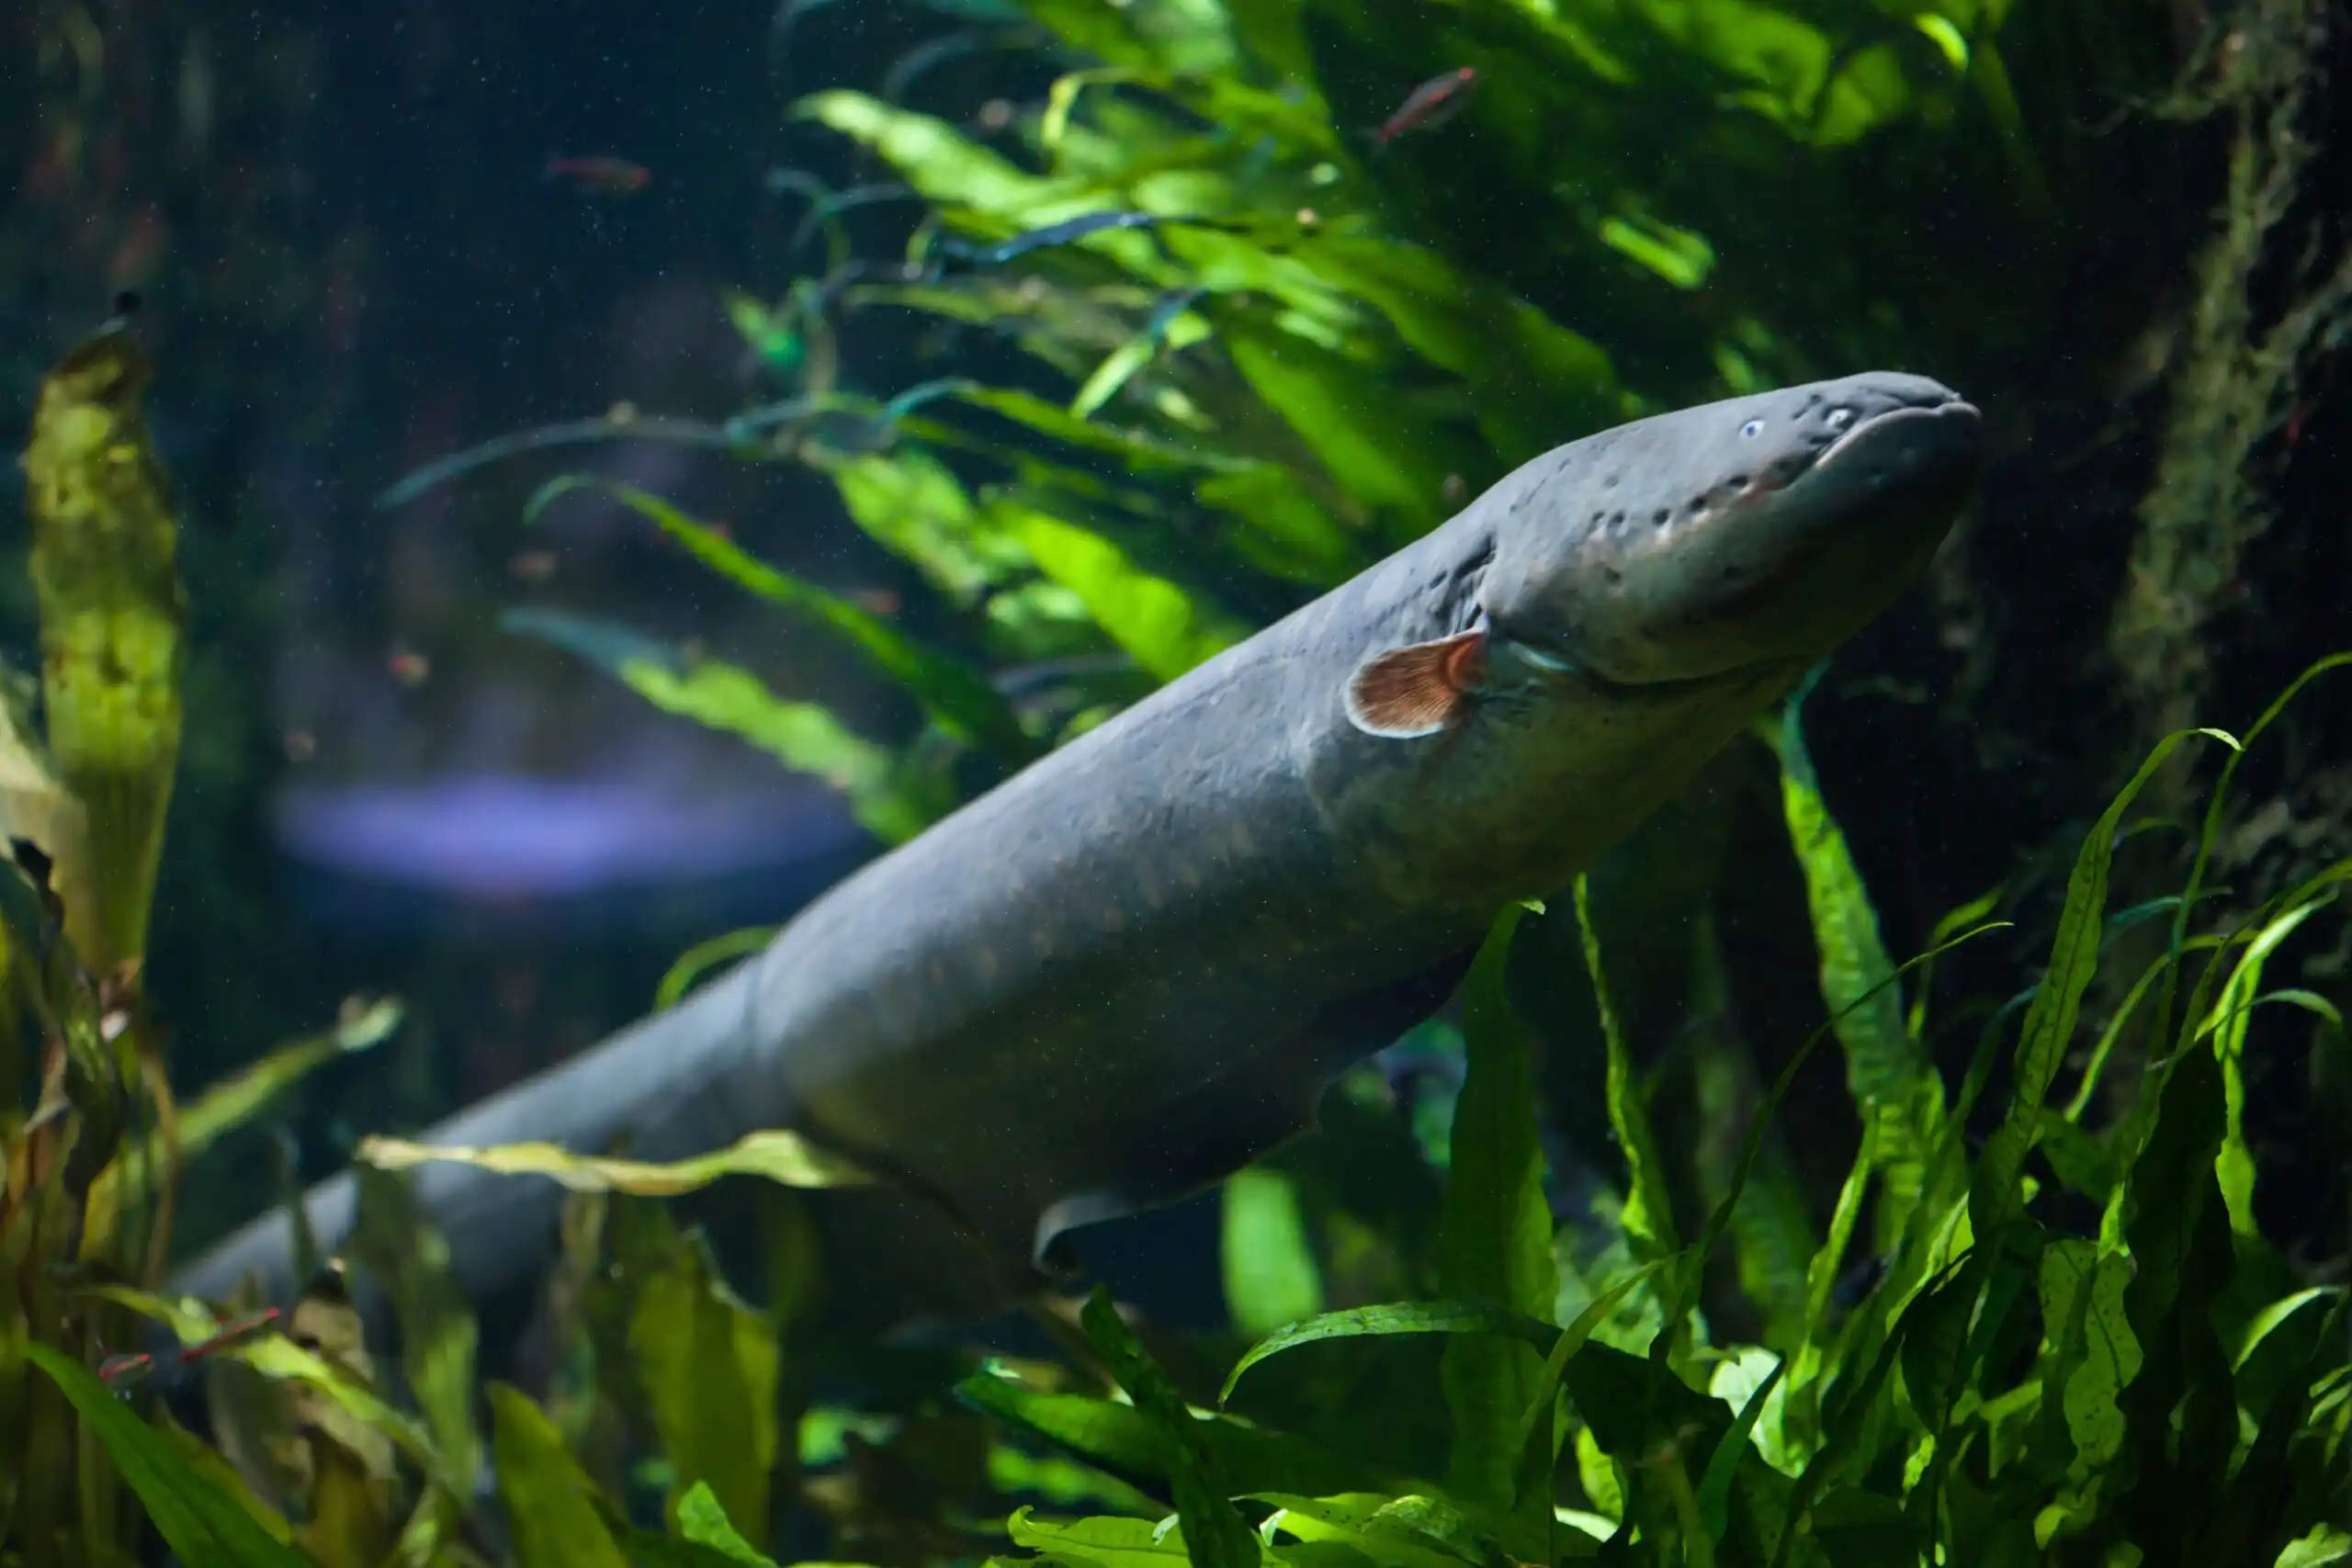 South American electric eel